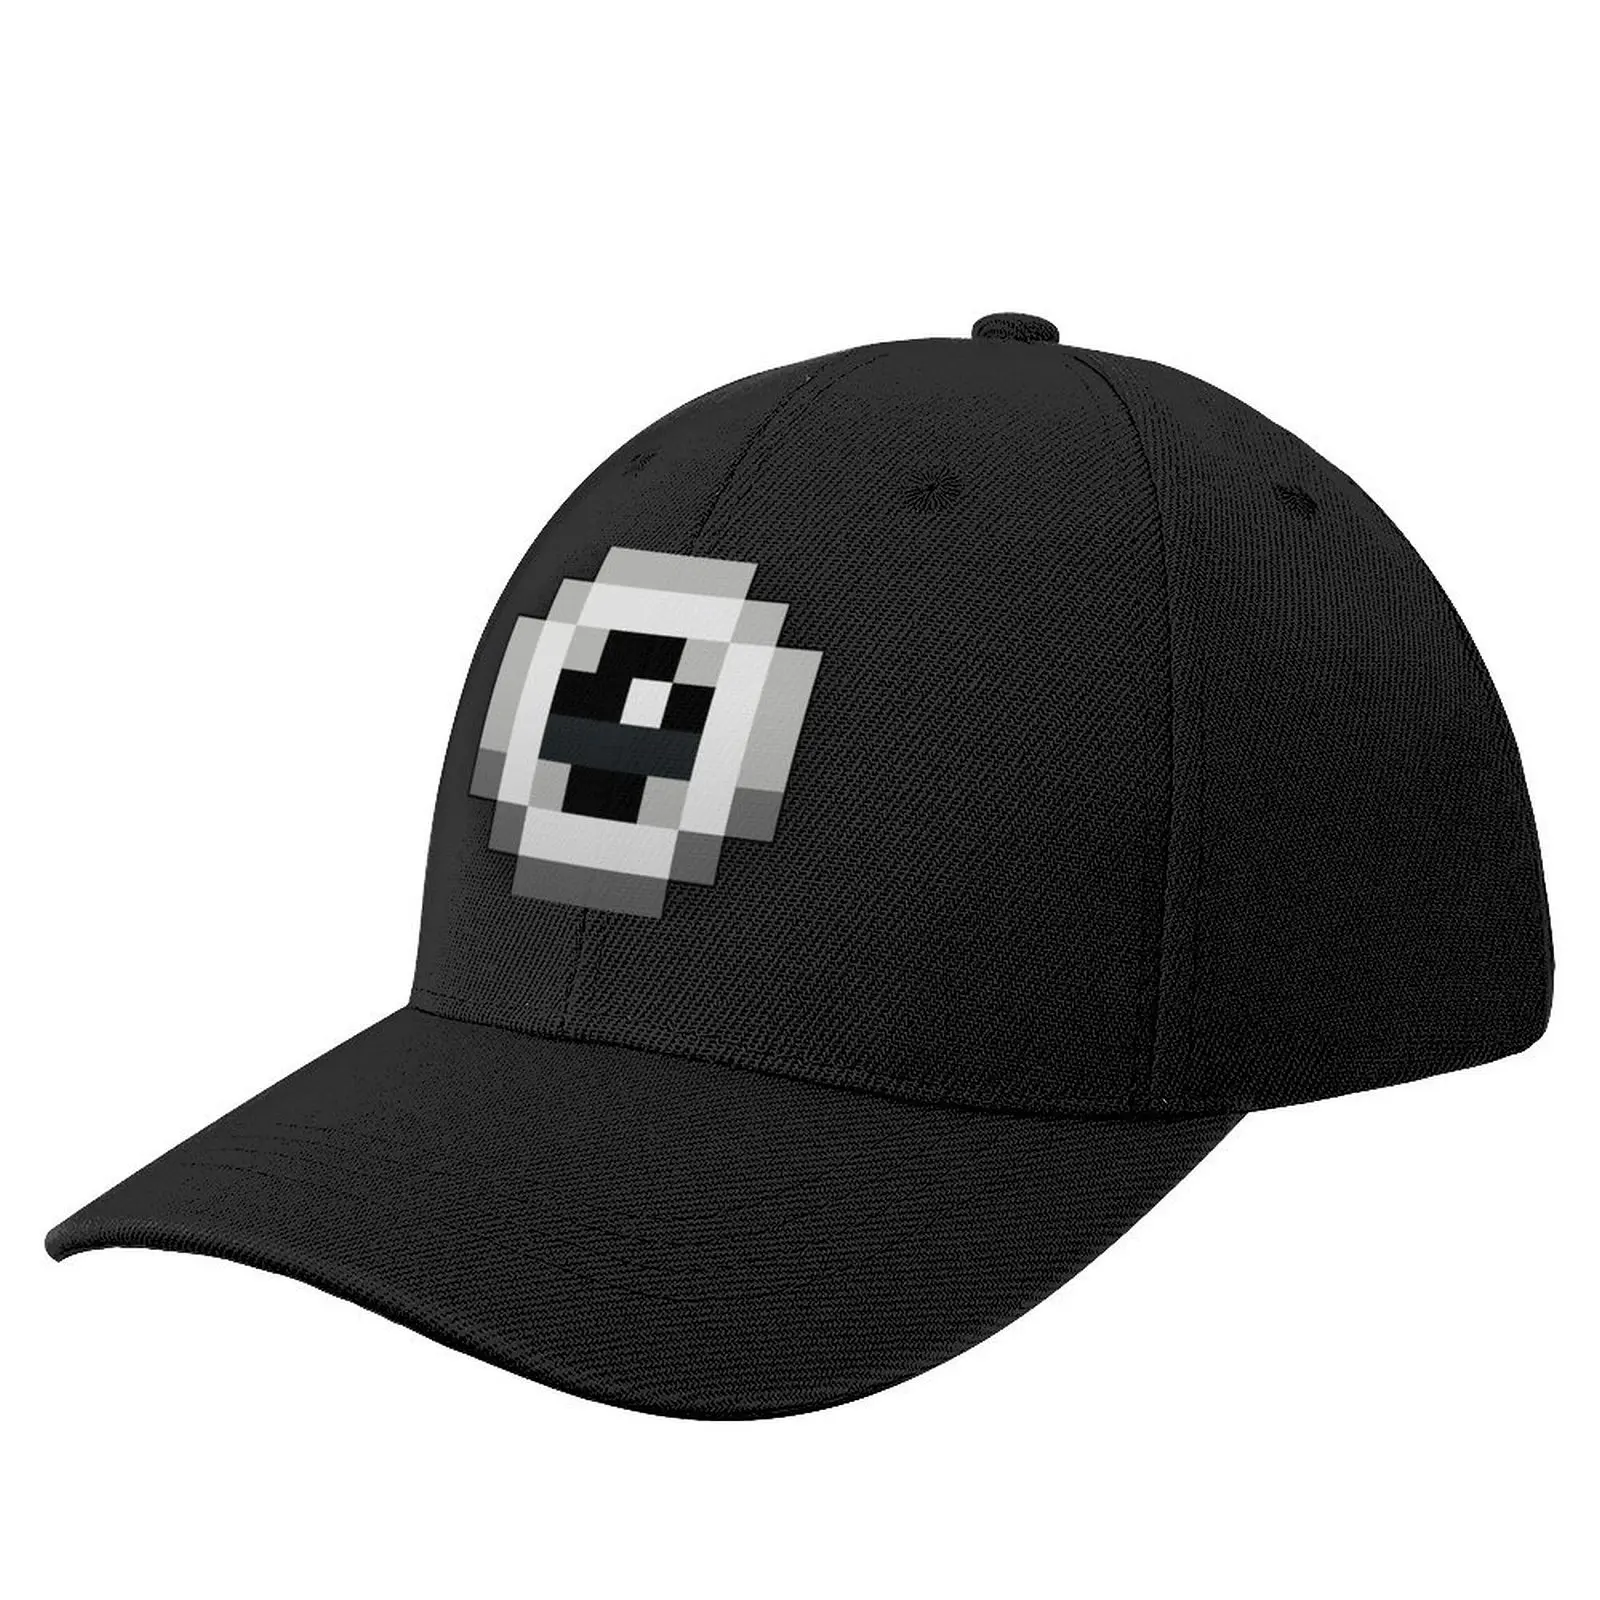 

Realm Of The Mad God - Realm Eye ROTMG Baseball Cap Dropshipping Cosplay Beach birthday For Girls Men's